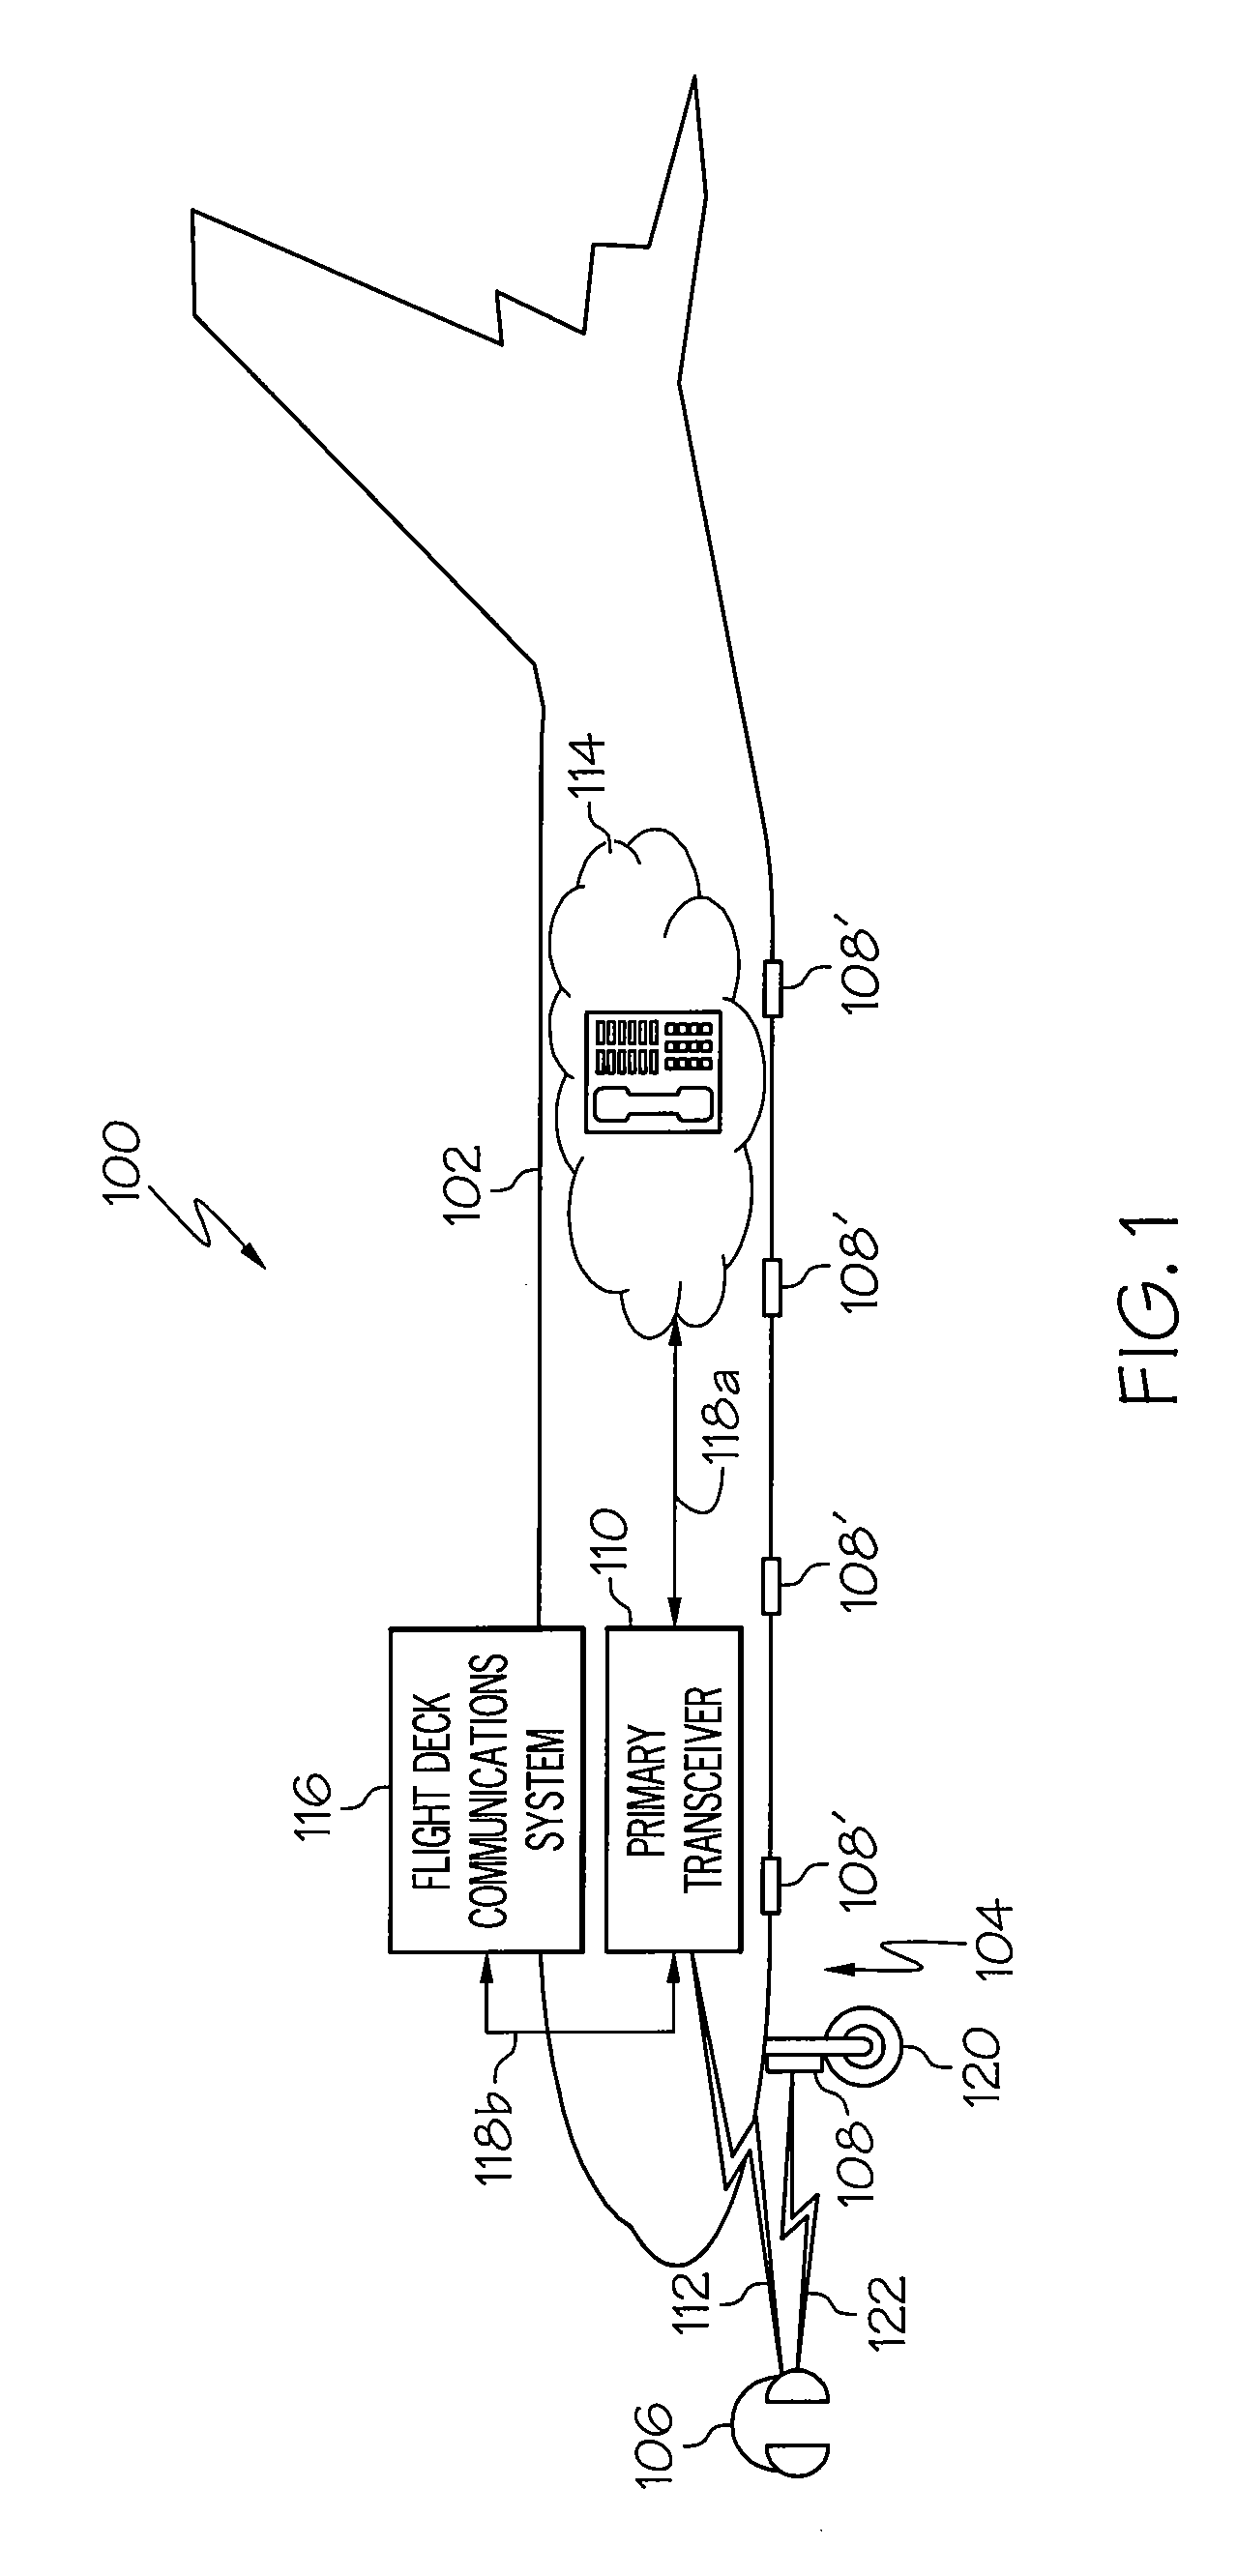 System and method for associating a wireless mobile communications device with a specific vehicle